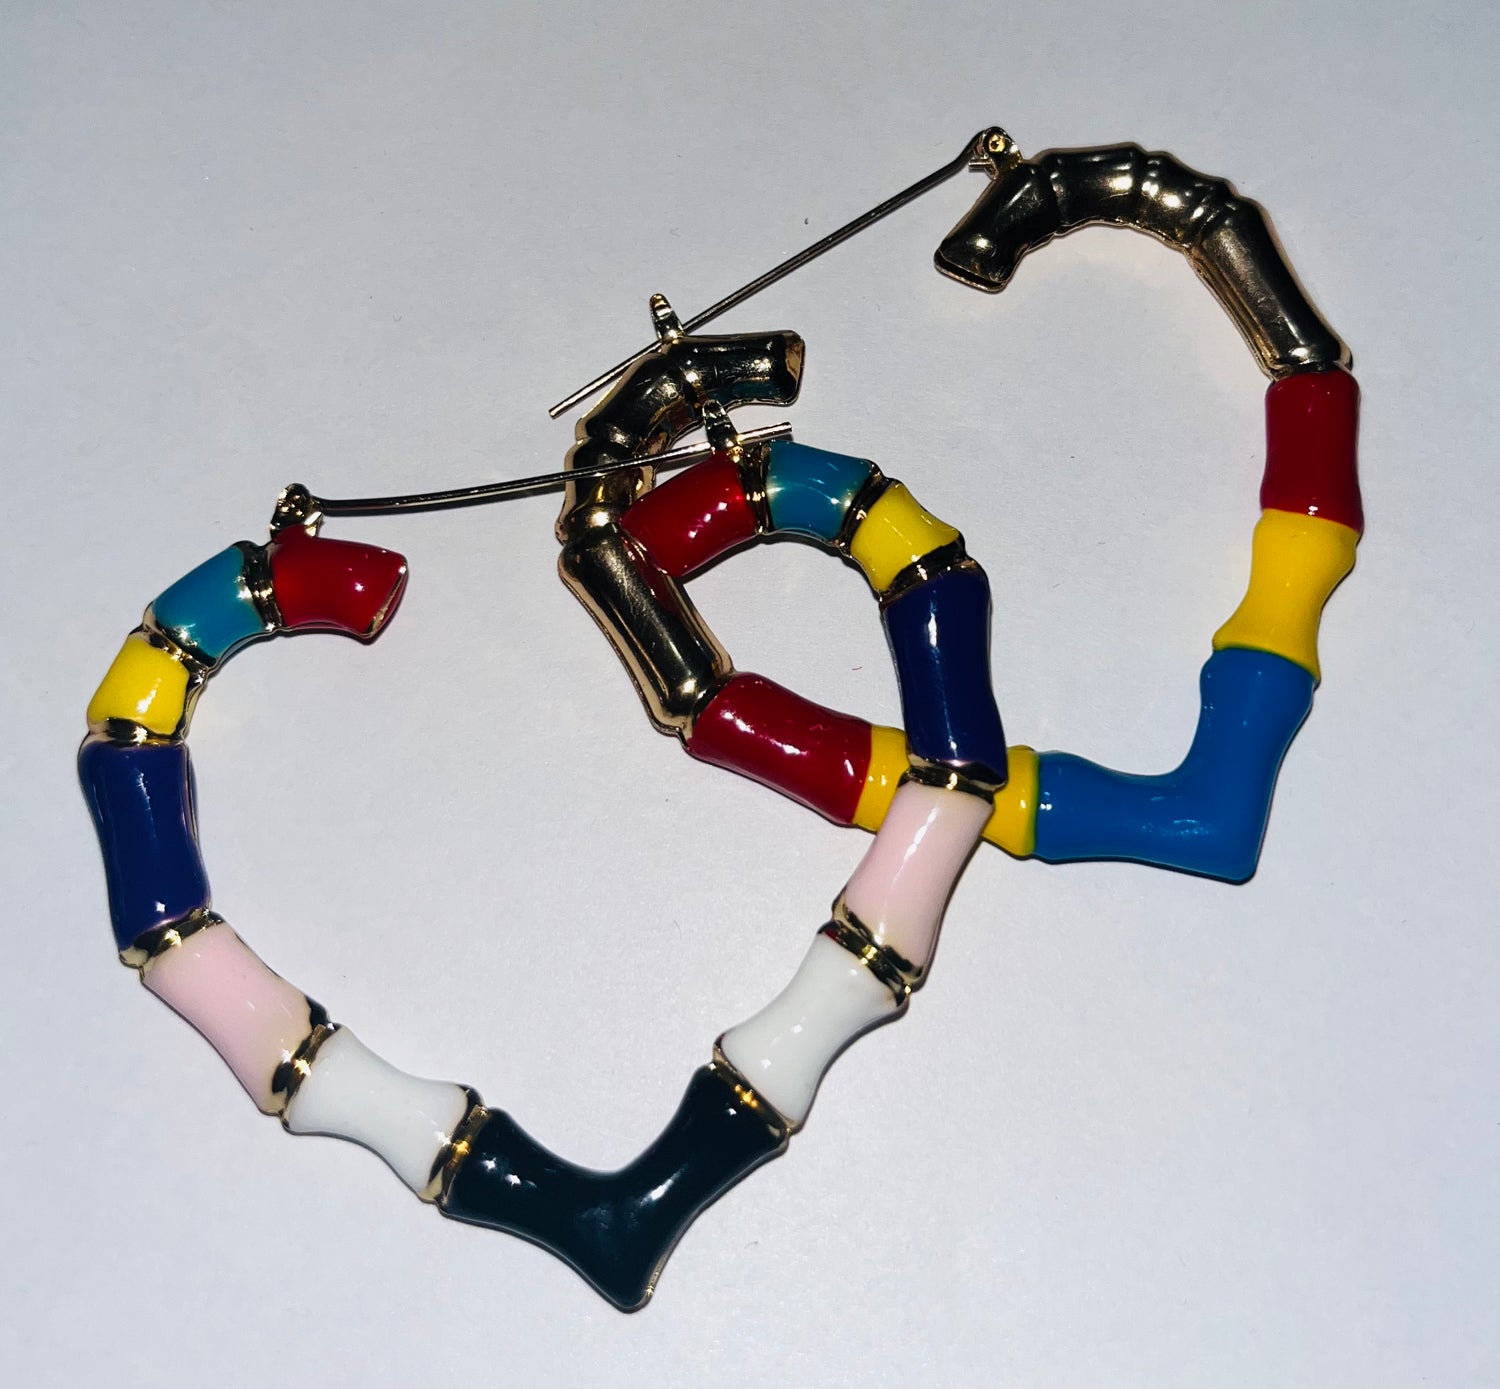 Colorful Heart Hoops